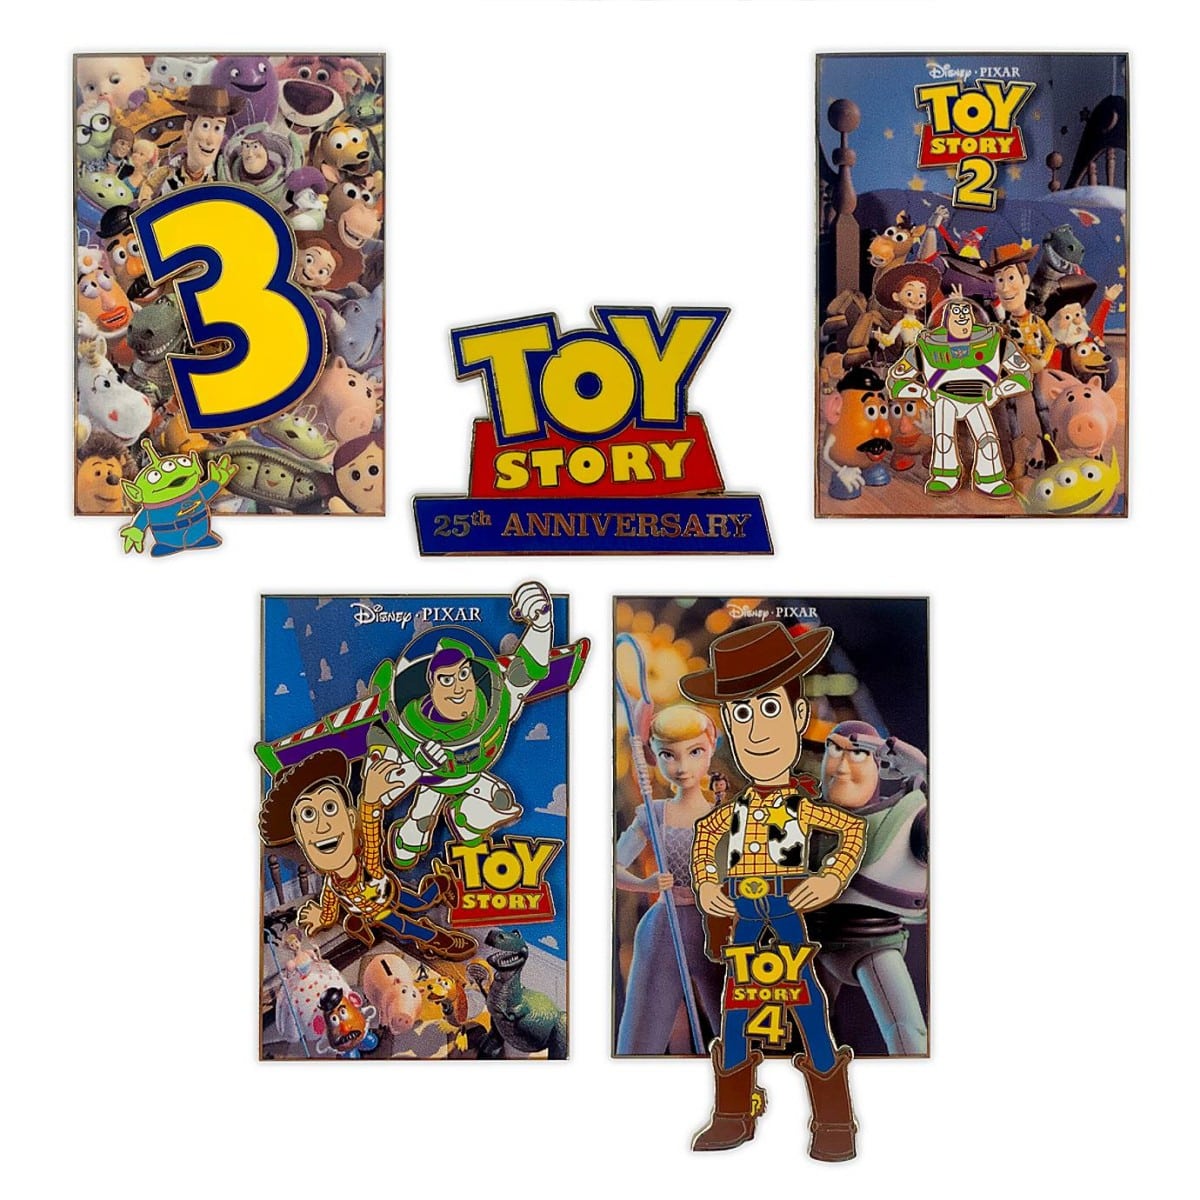 oy Story 25th Anniversary Pin Set – Limited Edition $149.99